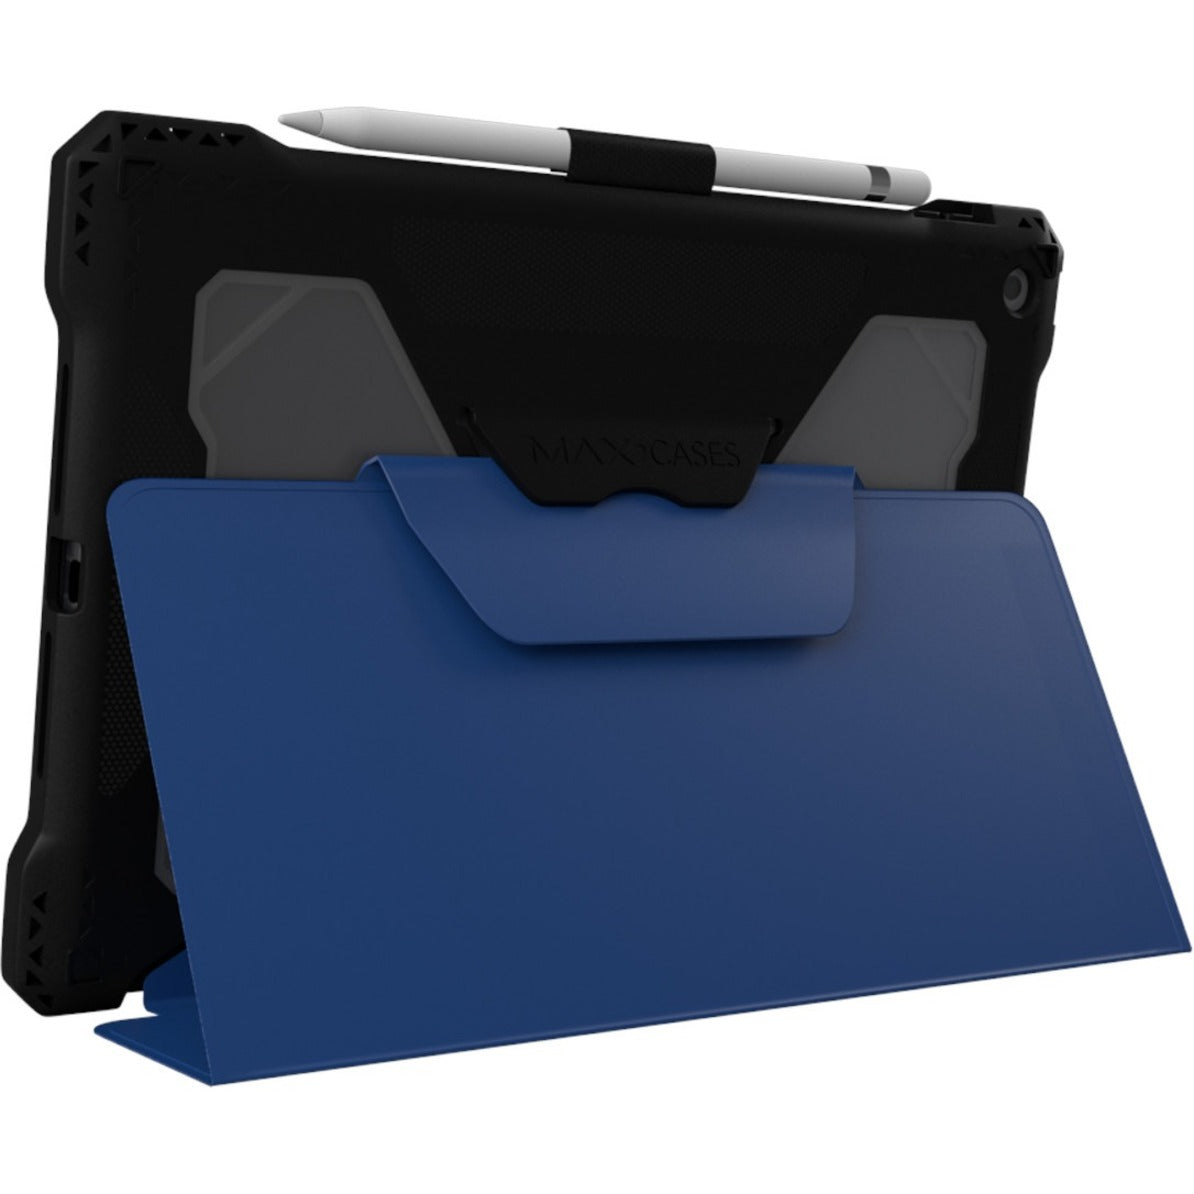 MAXCases Extreme Folio-X2 Rugged Carrying Case (Folio) for 10.2" Apple iPad (9th Generation) iPad (8th Generation) iPad (7th Generation) iPad Tablet - Blue